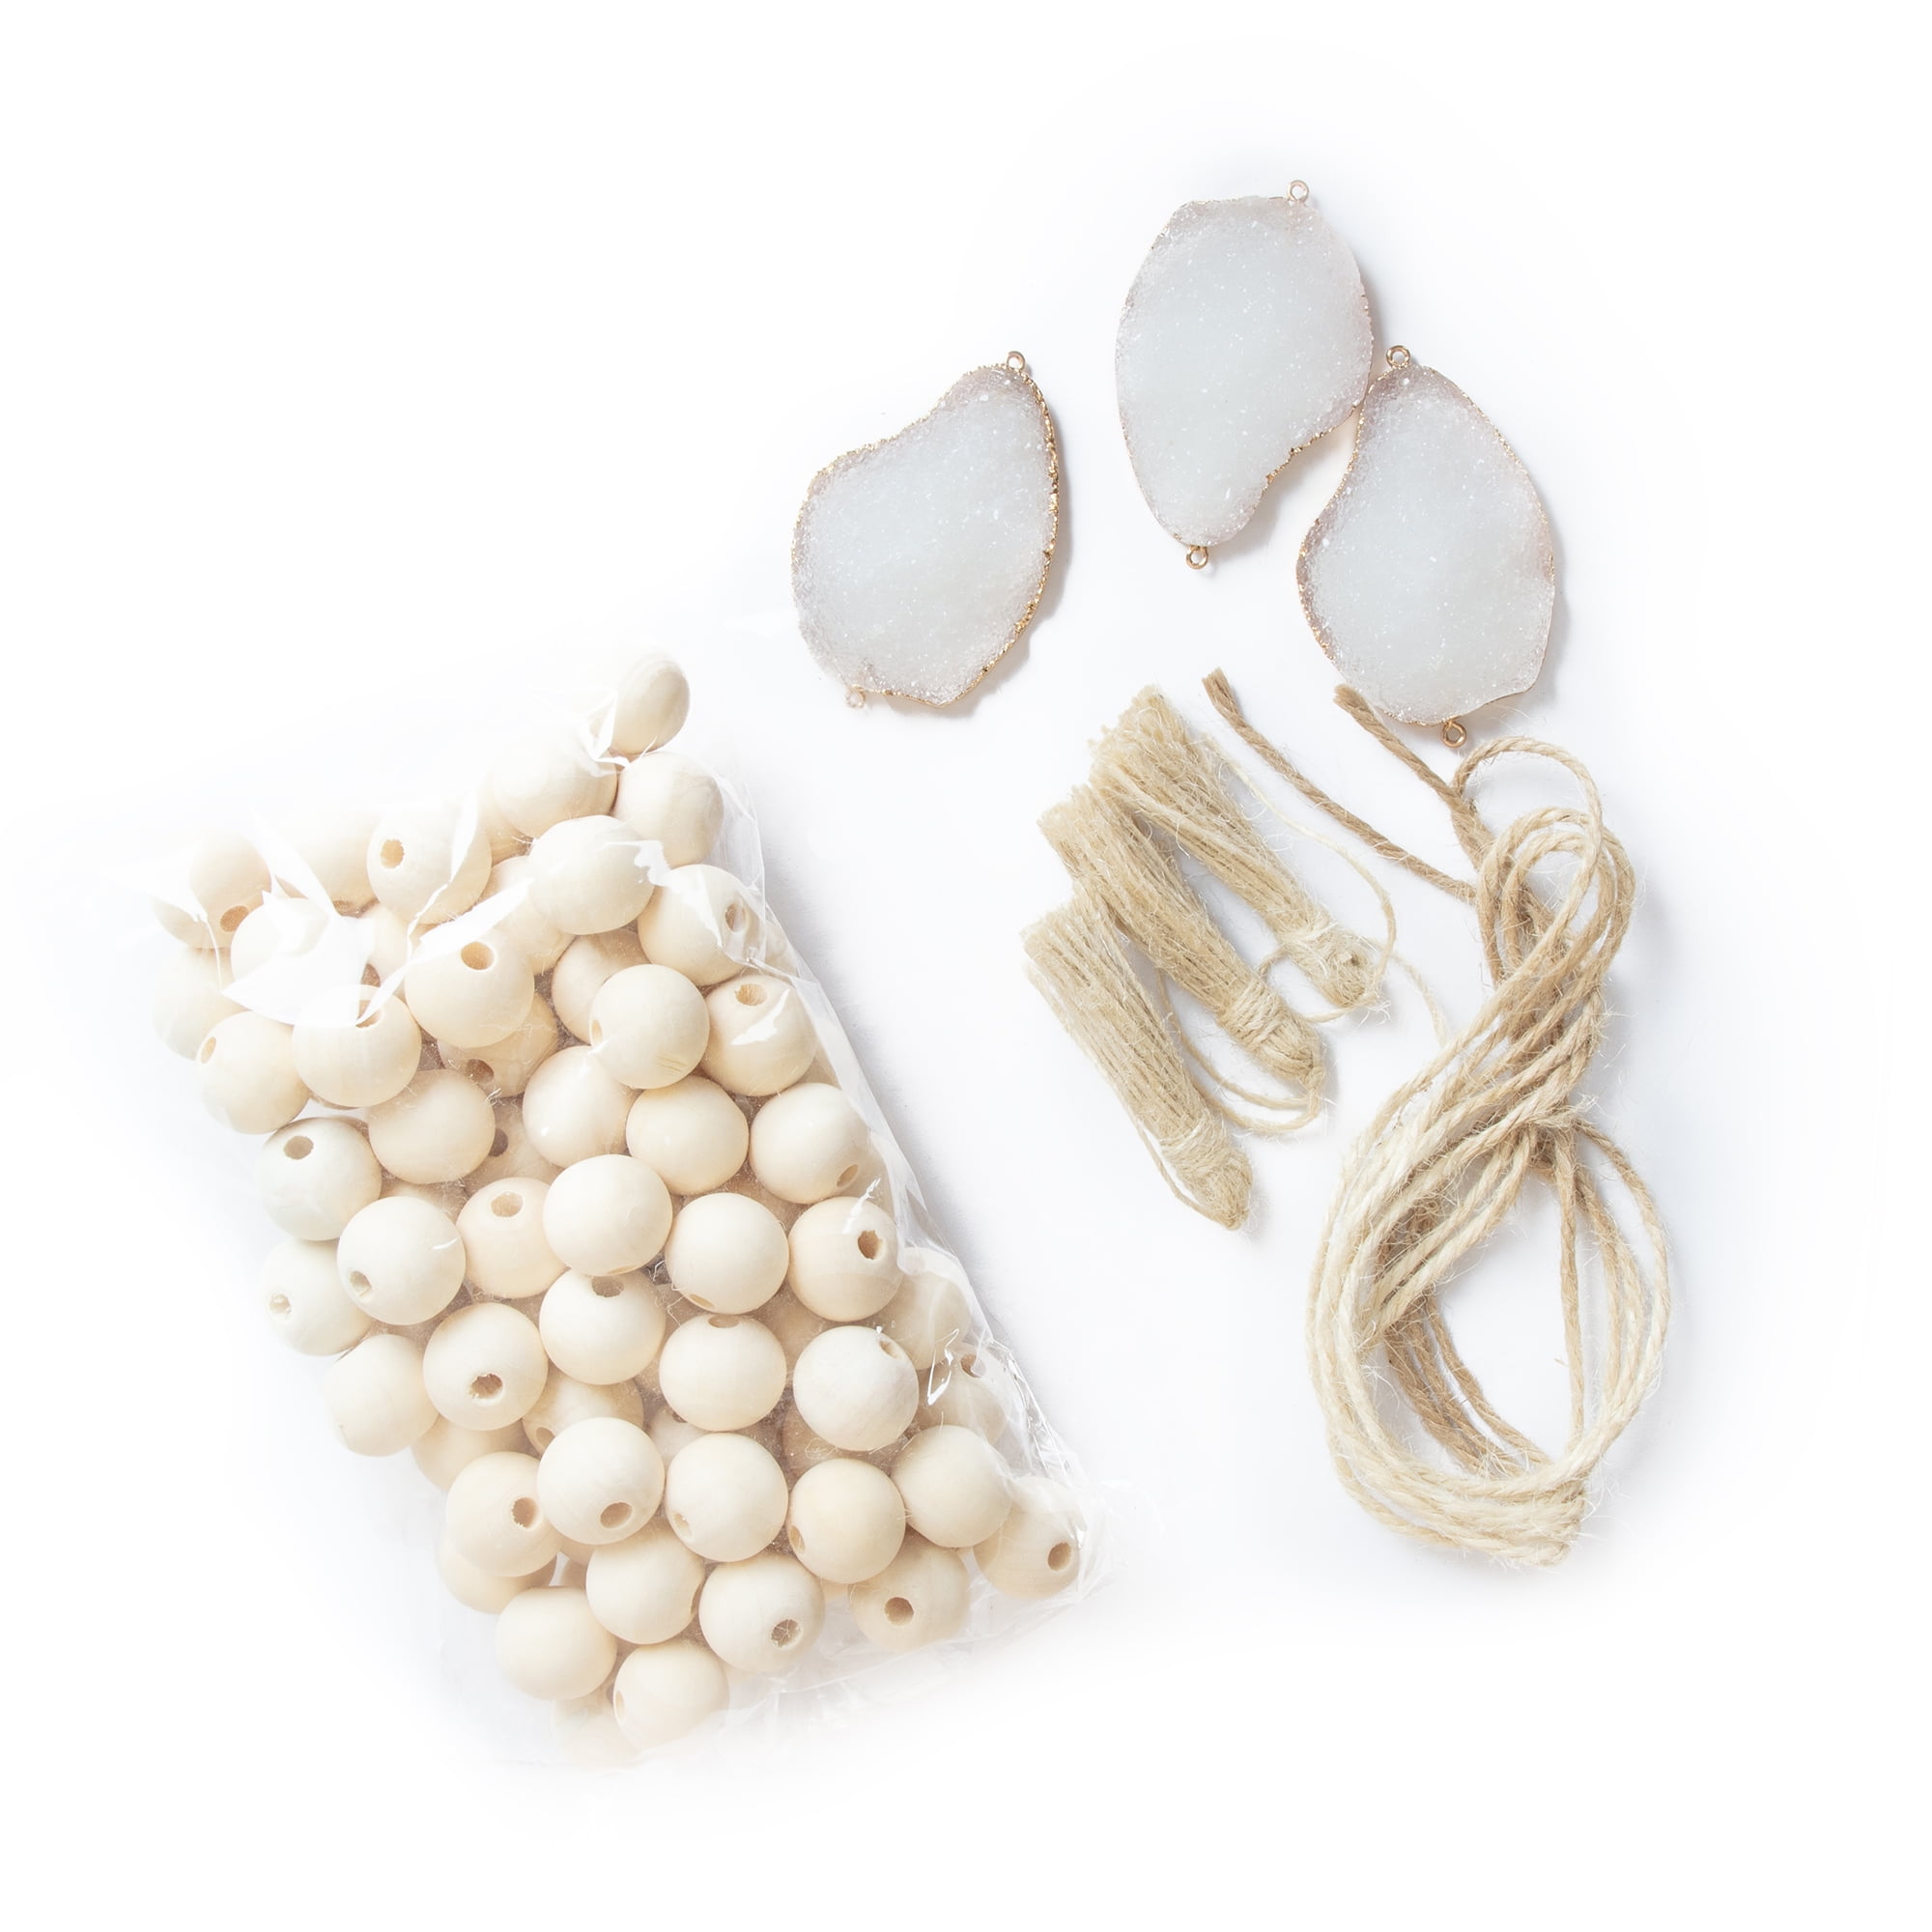 Cousin DIY Geode and Wood Bead Garland dcor Kit, Natural Beige, 103 pc., Adult Unisex, White